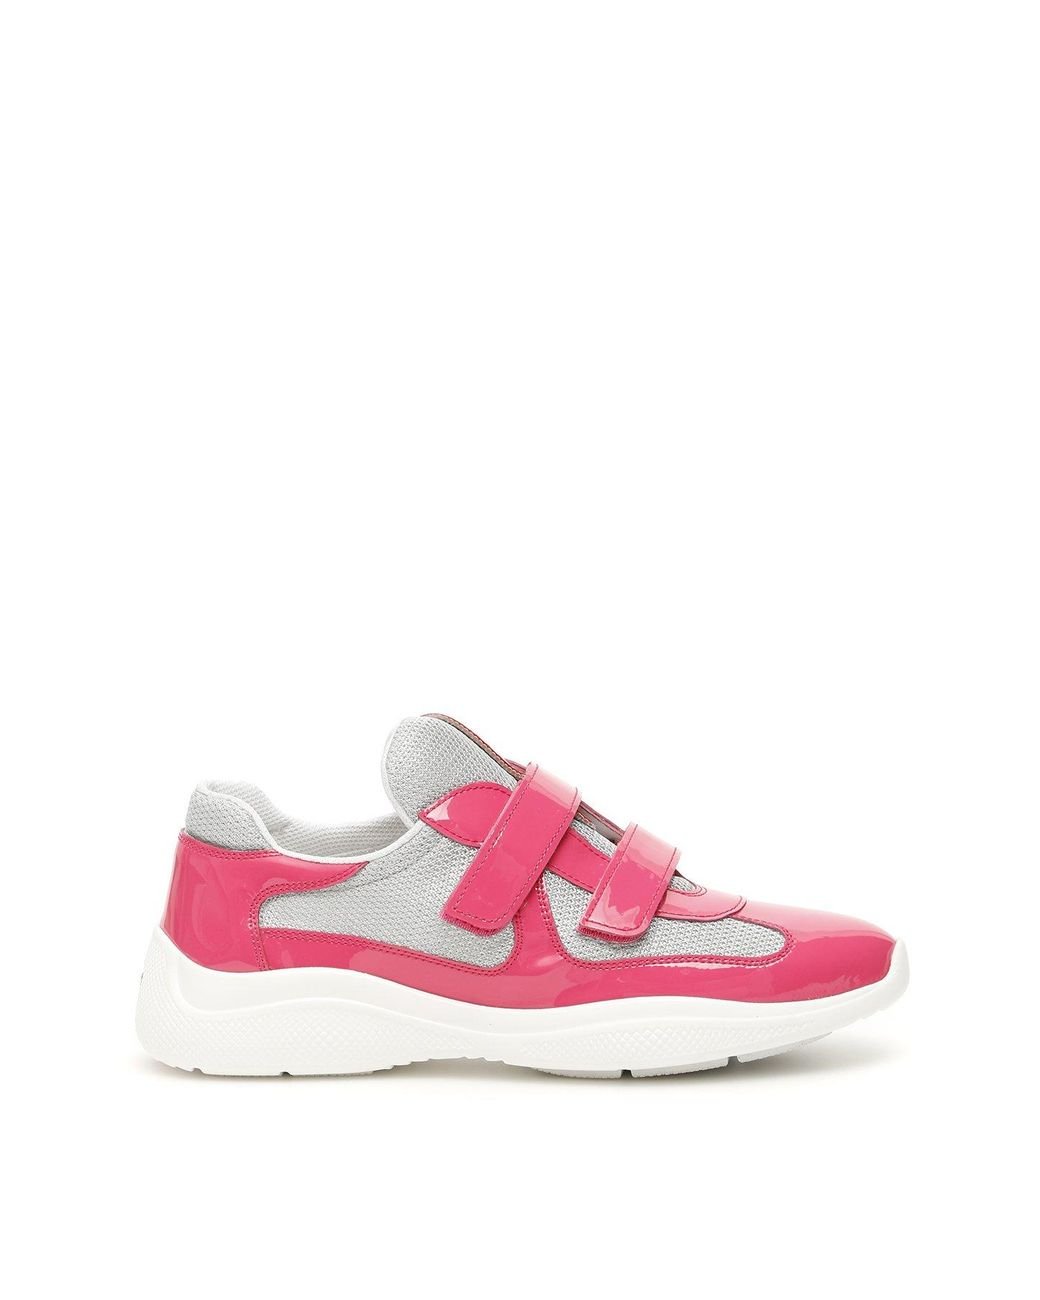 Prada Velcro Strap Contrasting Panelled Sneakers in Pink | Lyst Canada